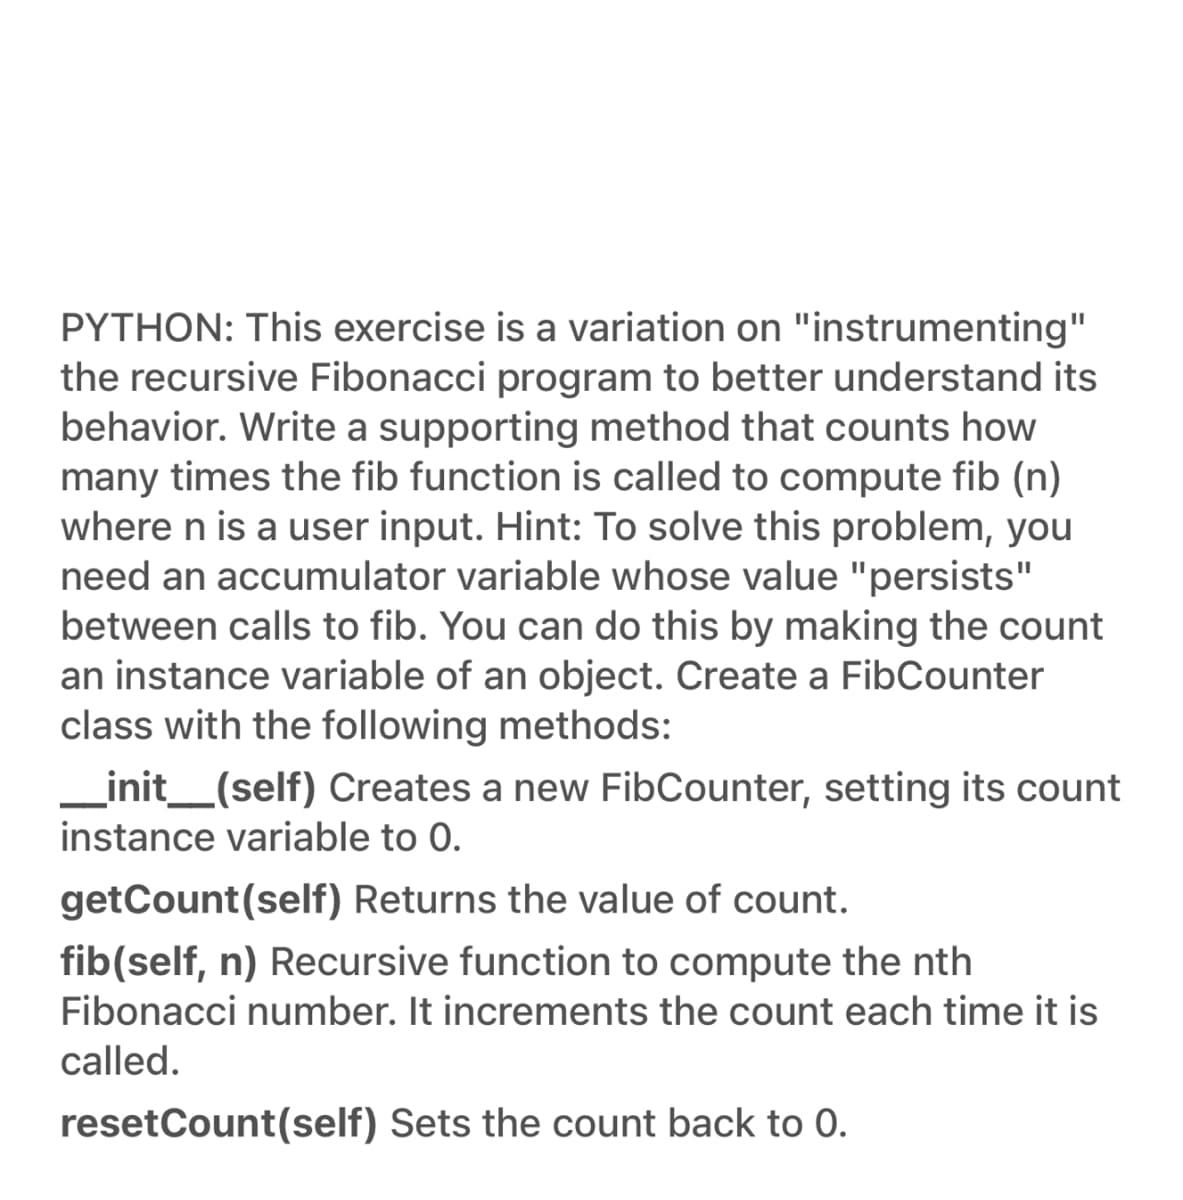 PYTHON: This exercise is a variation on "instrumenting"
the recursive Fibonacci program to better understand its
behavior. Write a supporting method that counts how
many times the fib function is called to compute fib (n)
where n is a user input. Hint: To solve this problem, you
need an accumulator variable whose value "persists"
between calls to fib. You can do this by making the count
an instance variable of an object. Create a FibCounter
class with the following methods:
_init_(self) Creates a new FibCounter, setting its count
instance variable to 0.
getCount(self) Returns the value of count.
fib(self, n) Recursive function to compute the nth
Fibonacci number. It increments the count each time it is
called.
resetCount(self) Sets the count back to 0.
